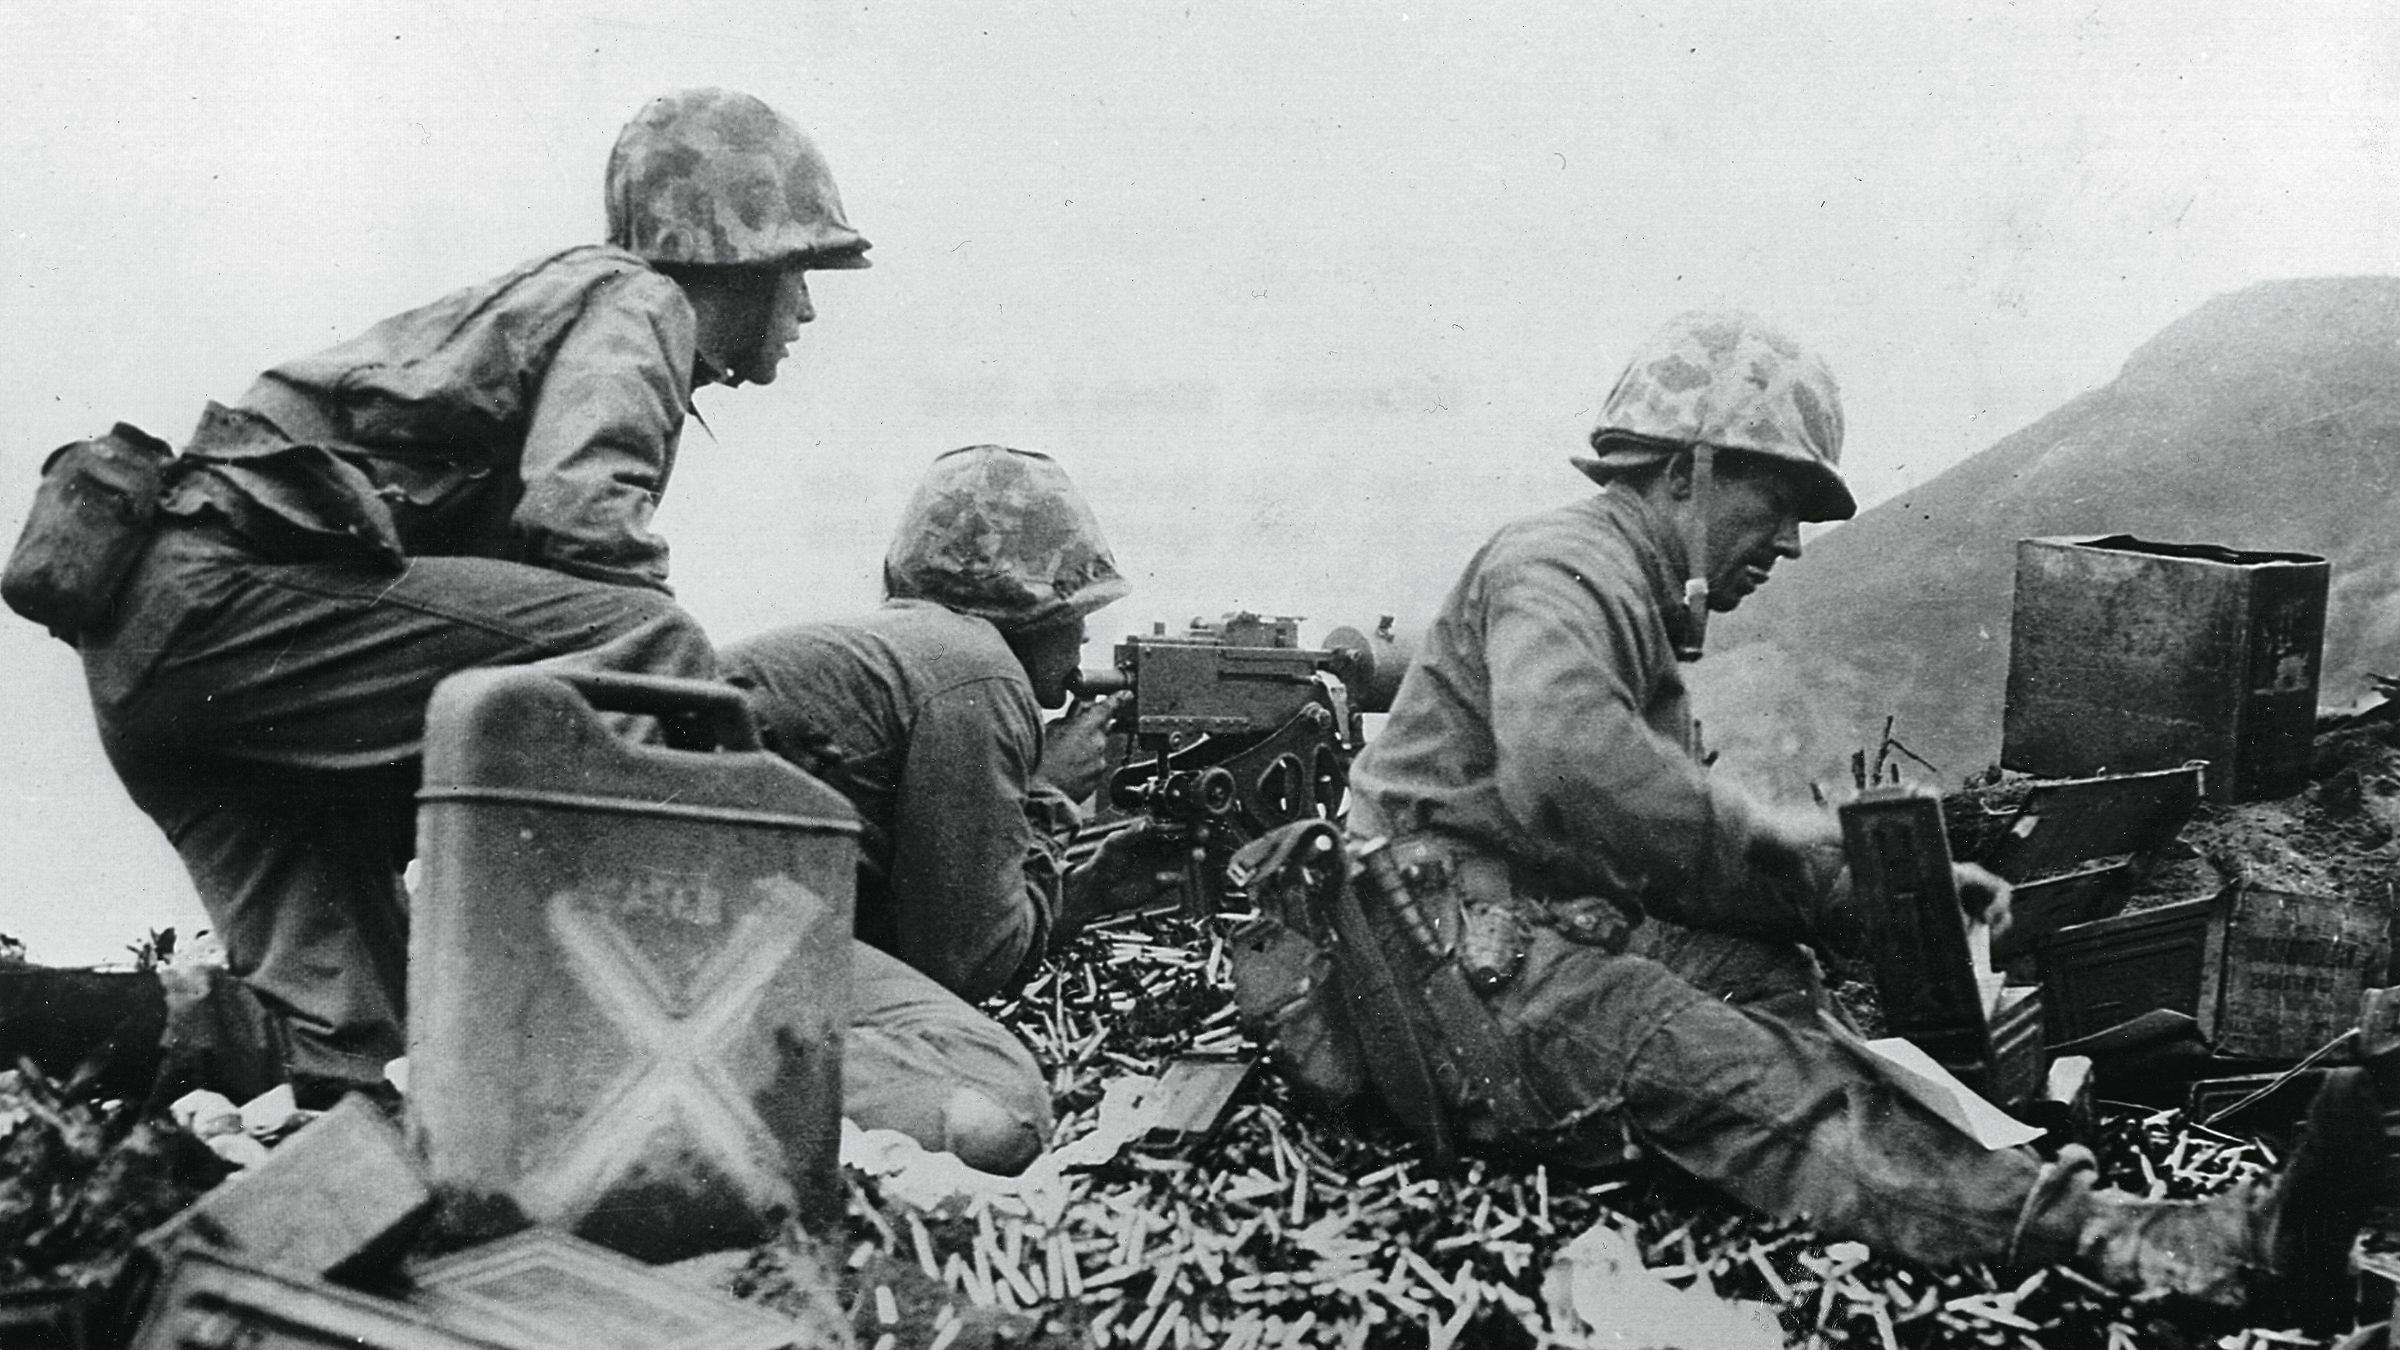 With their Ka-Bar fighting knives at their sides, U.S. Marines sit atop a pile of spent shells and provide cover for comrades moving inland on Iwo Jima.